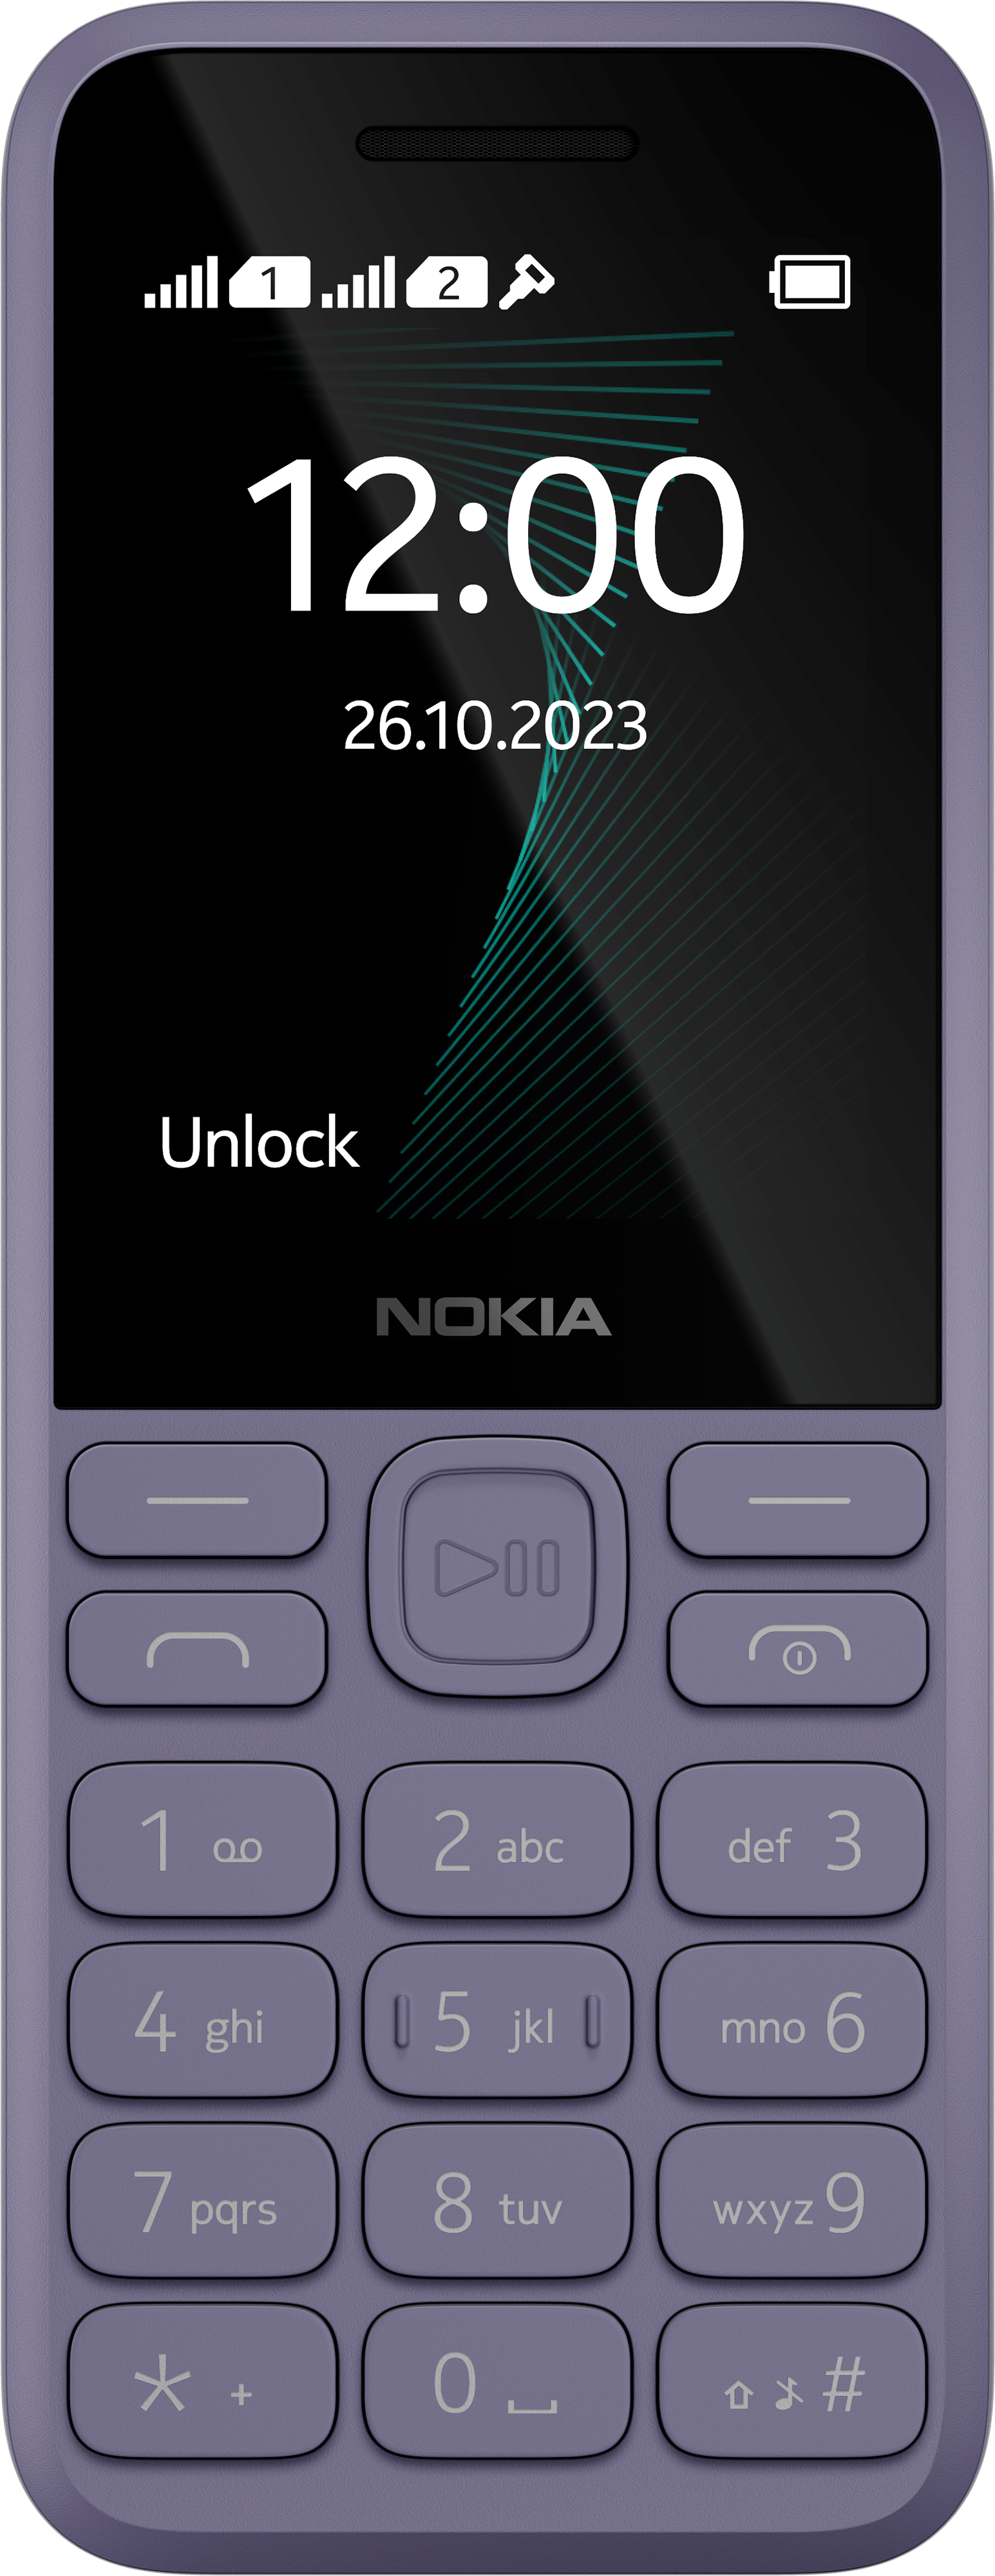 The new Nokia 130 feature phone